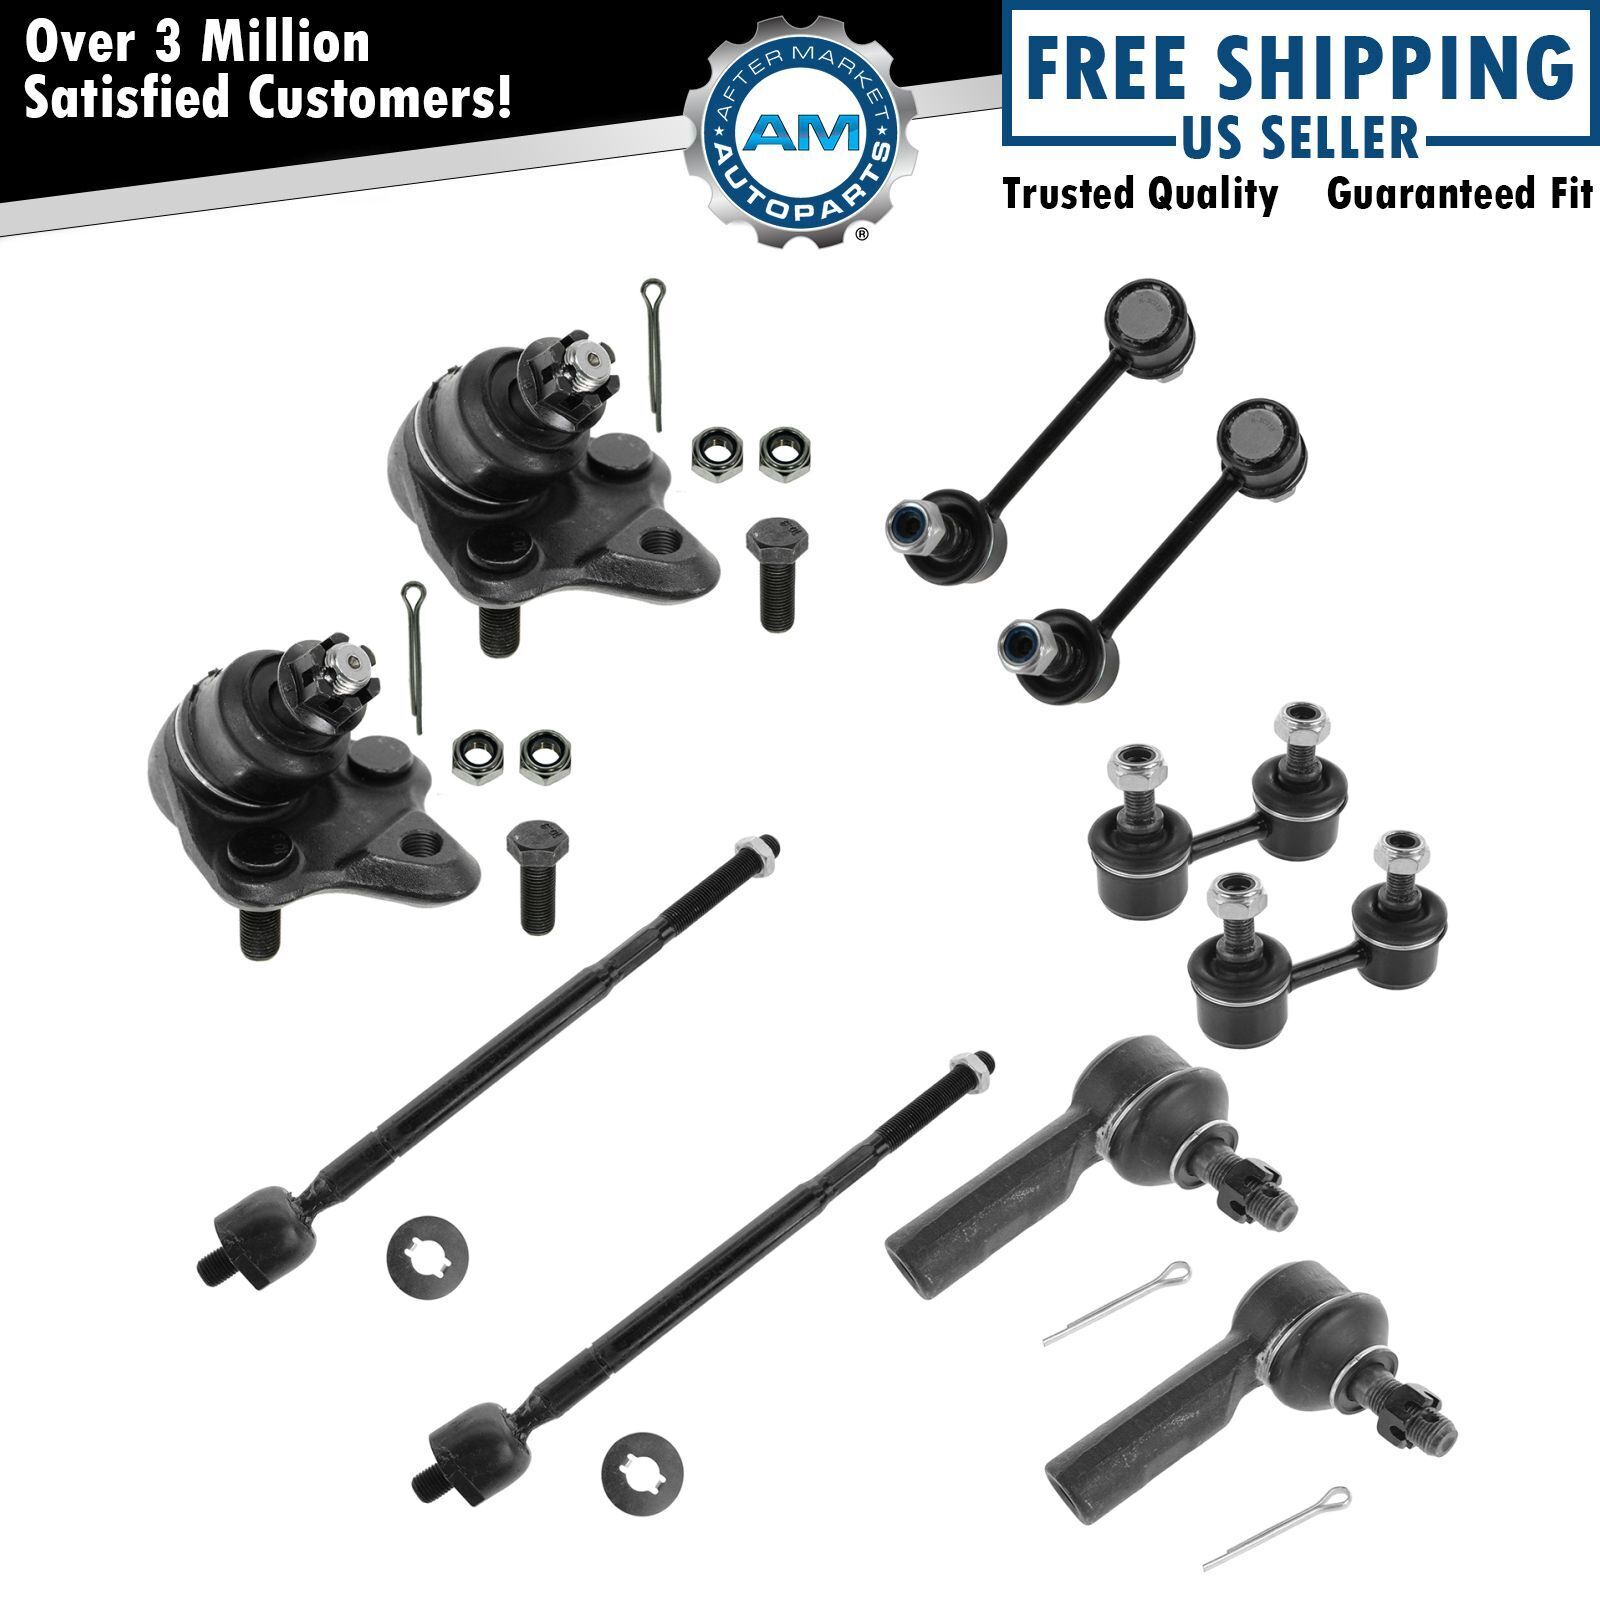 Ball Joint Tie Rod Sway Bar Link LH RH Kit Set of 4 for Corolla Prizm New